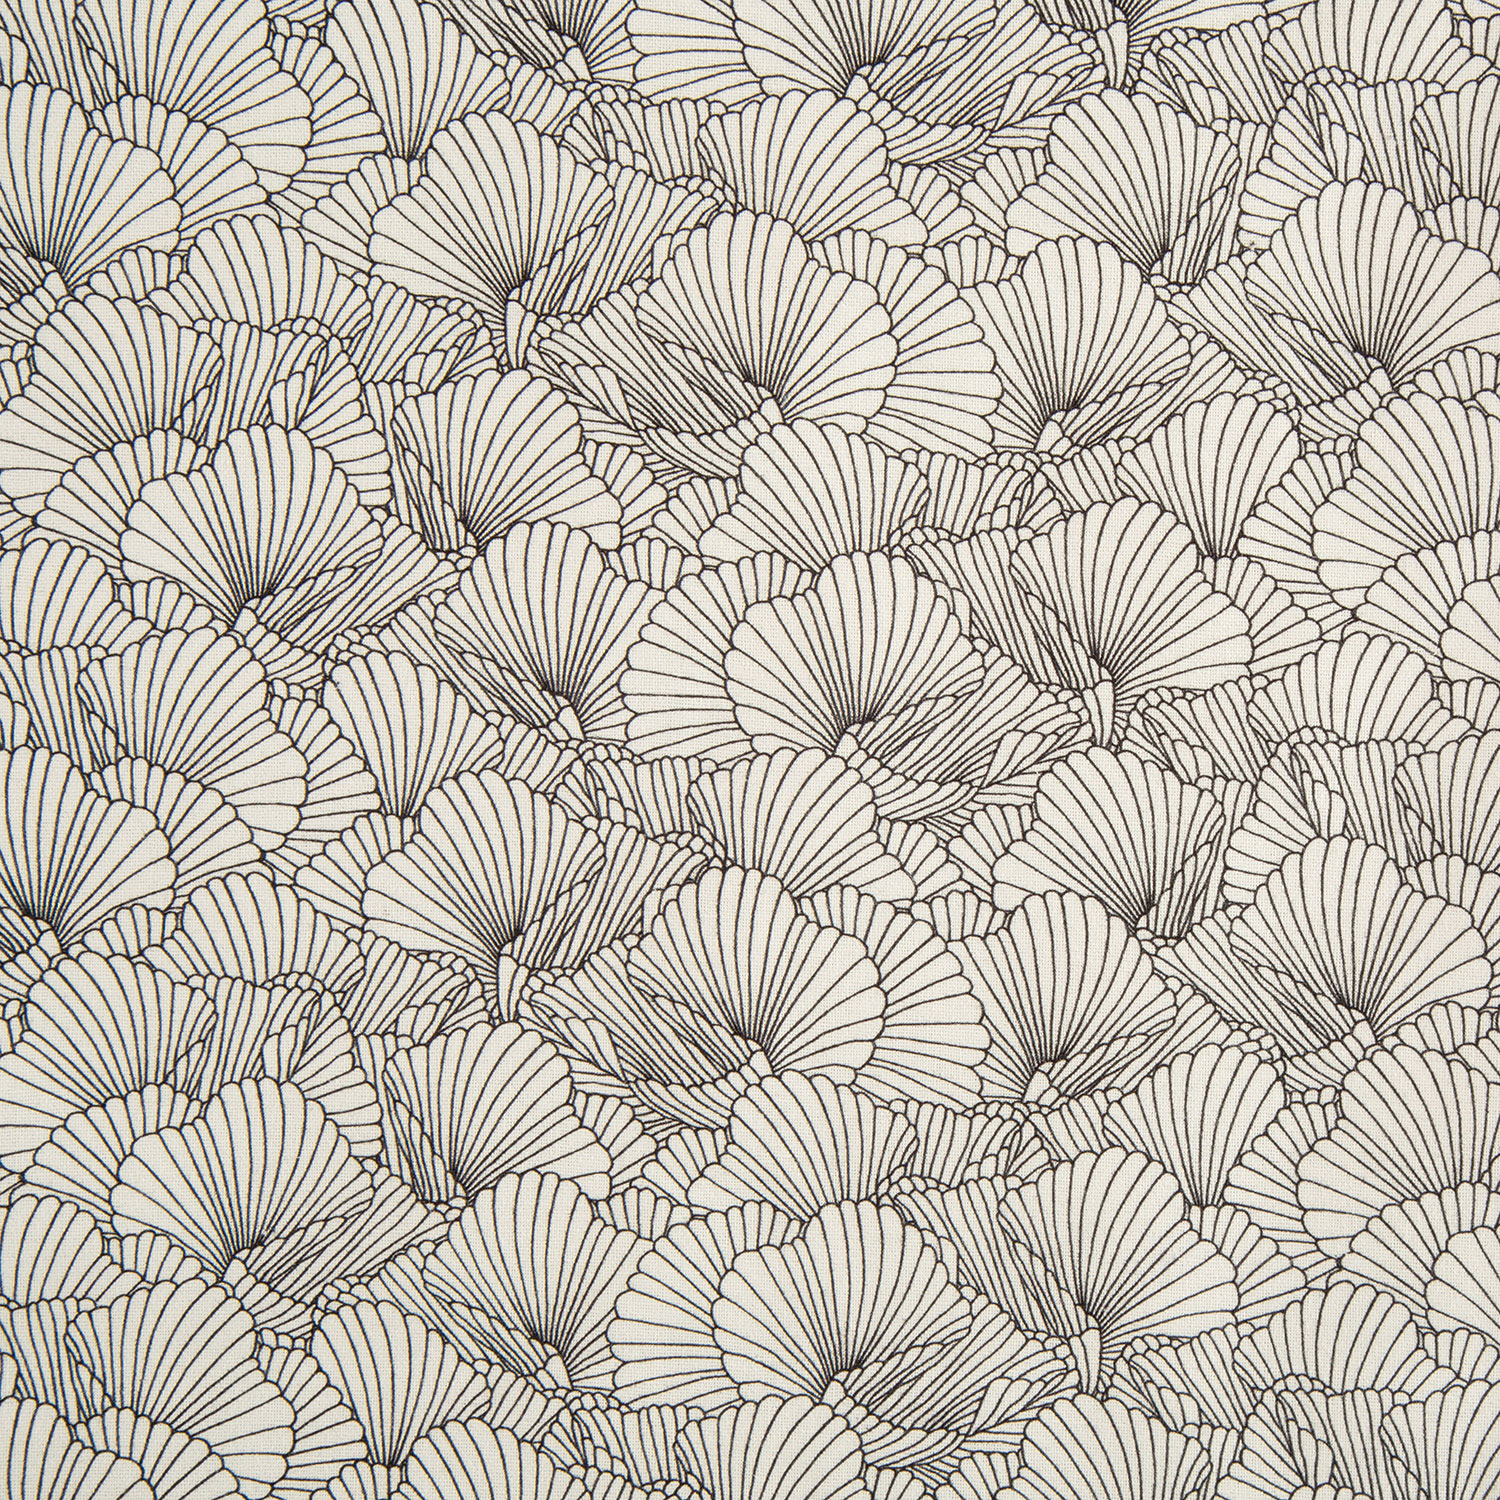 Fabric Freedom Monochrome Madness 1m Quilting Cotton Pick N Mix - Pick any 2 - Scalloped Shavings